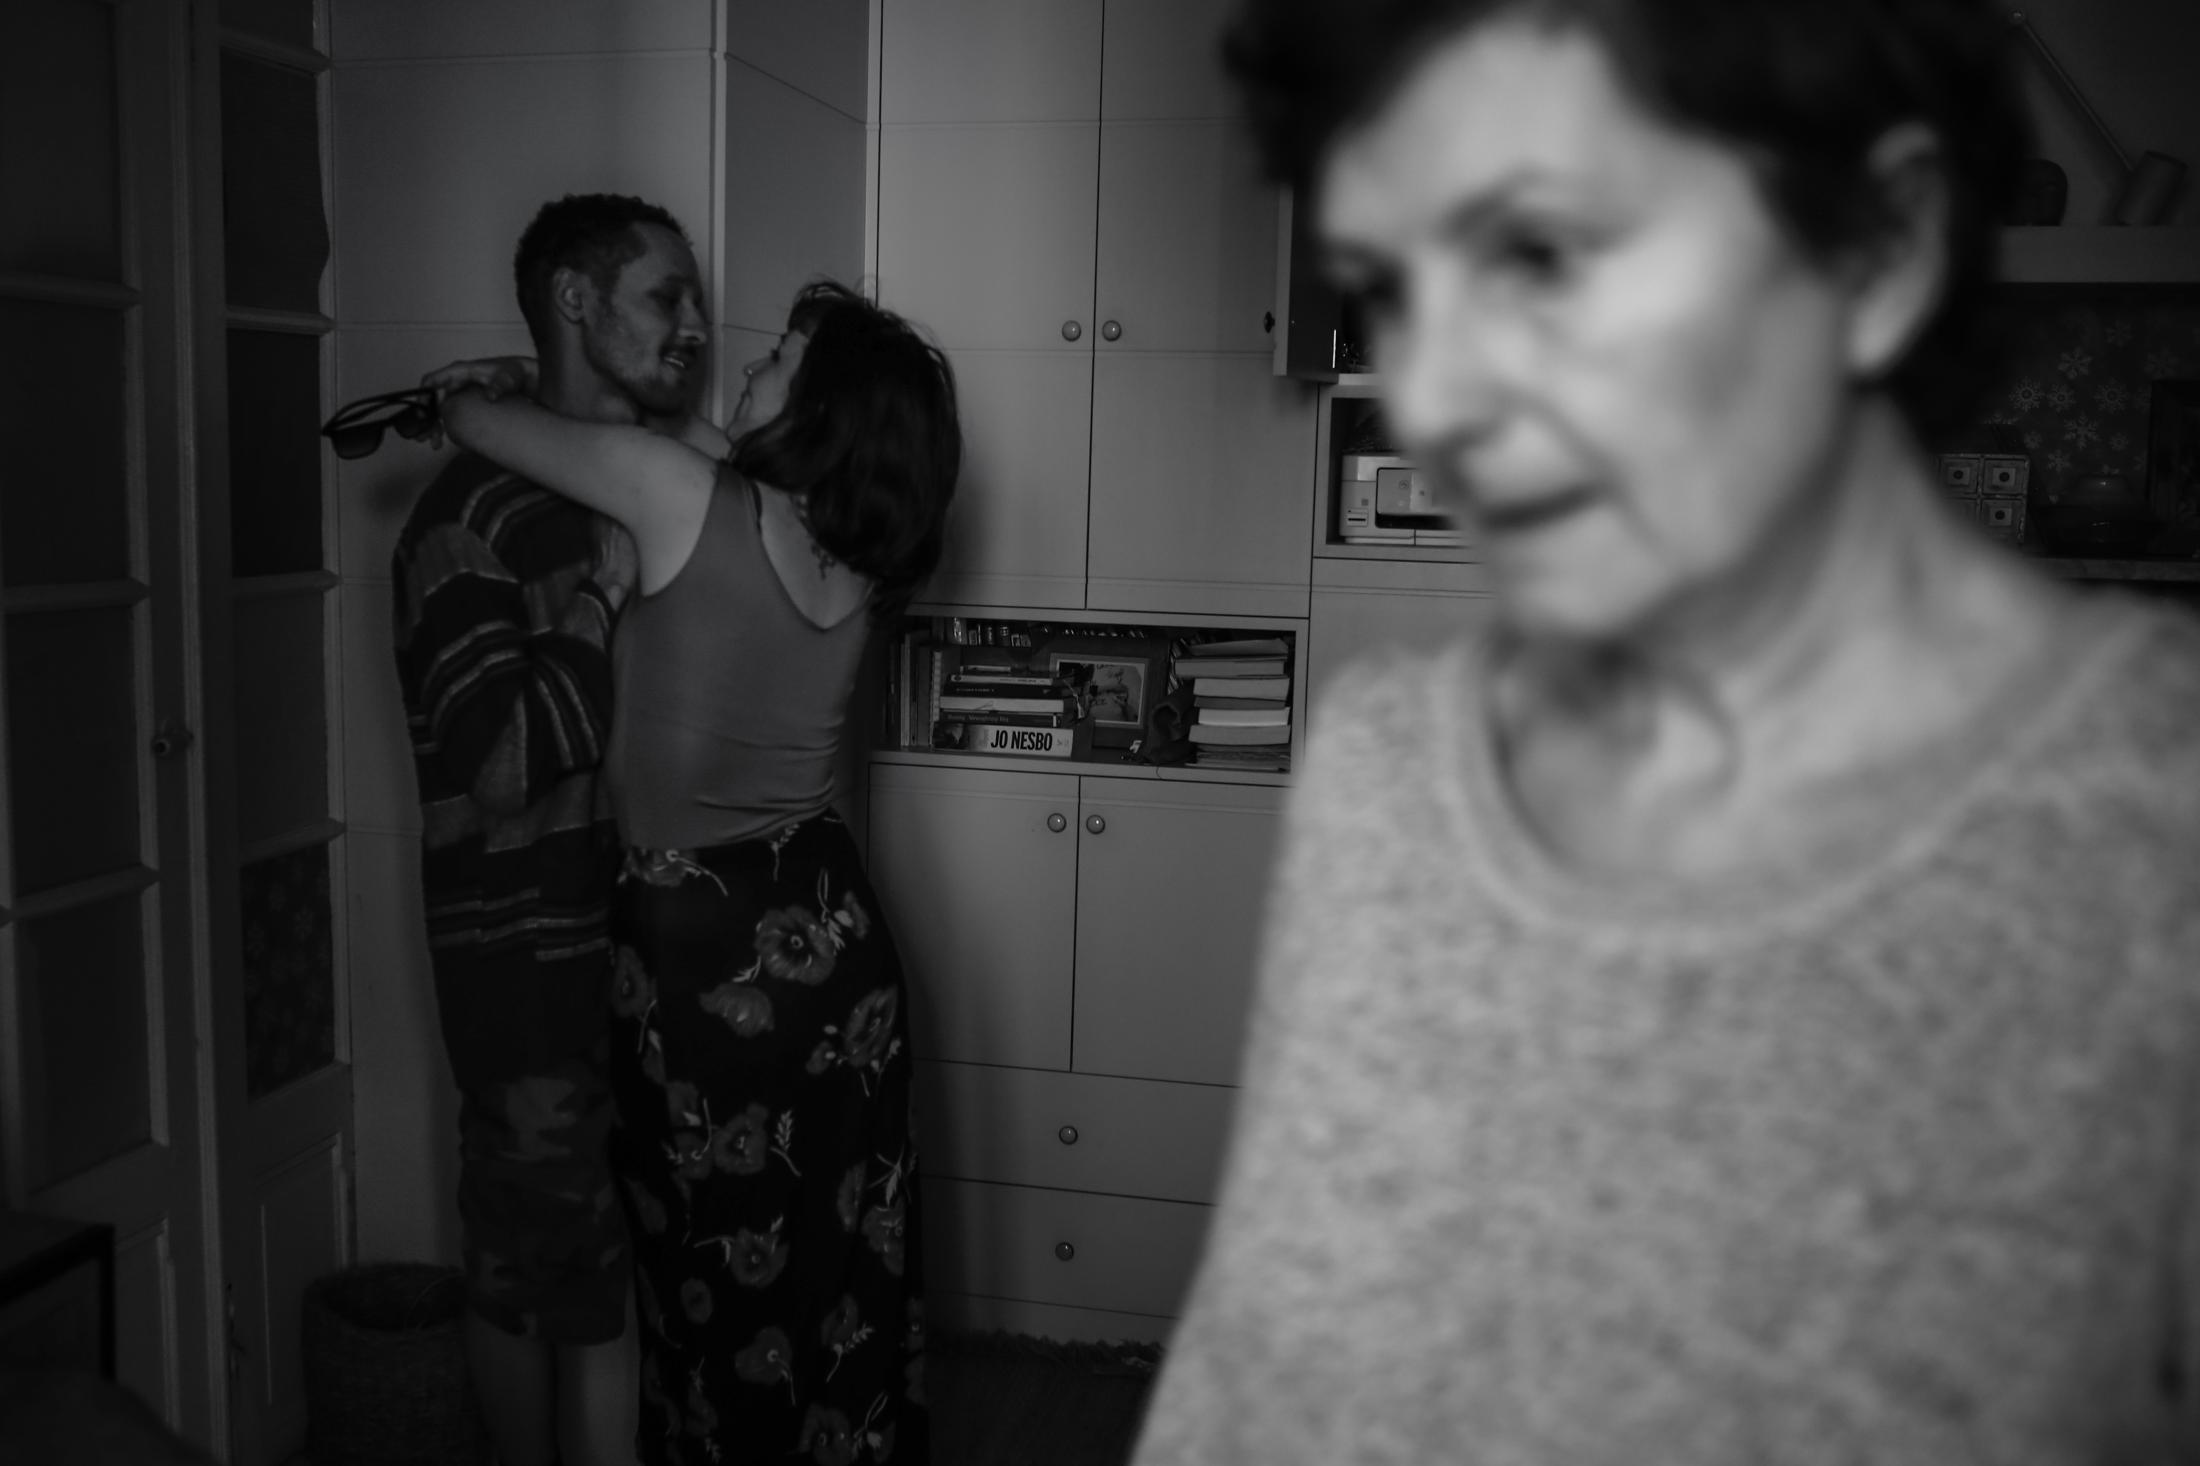 LOVERS STAY AT HOME - Ewa and Mateusz have no privacy because they don't...